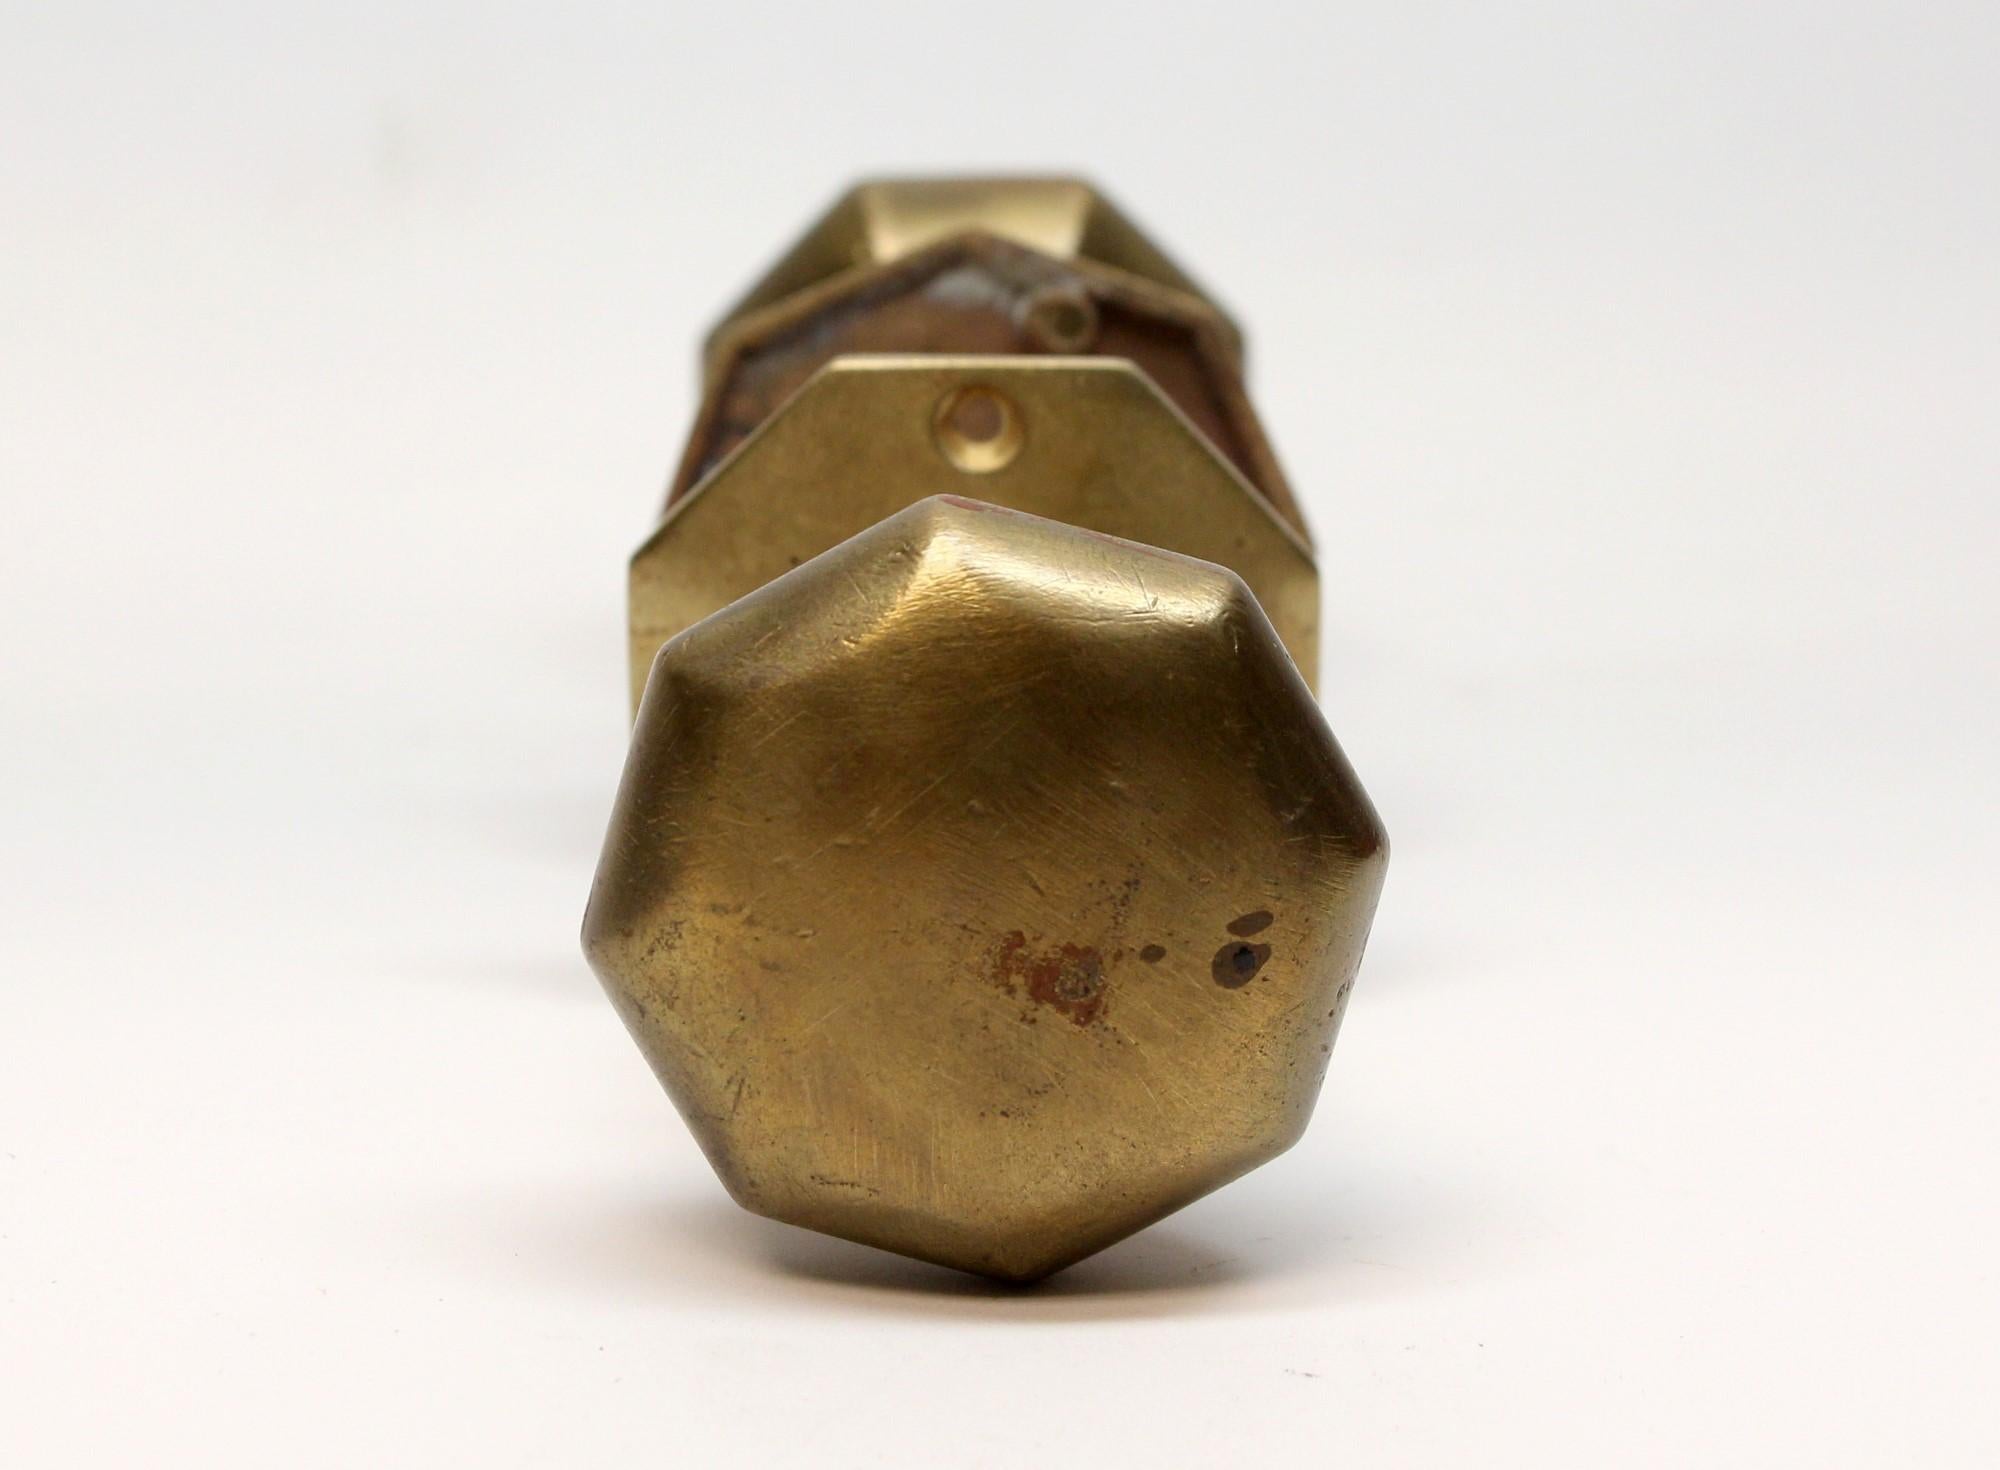 Octagon shaped knobs made of brass in an antique finish. The knobs take a 0.375 in. entry size spindle. Priced includes one pair of knobs with spindle and two matching rosettes. This can be seen at our 400 Gilligan St location in Scranton, PA.